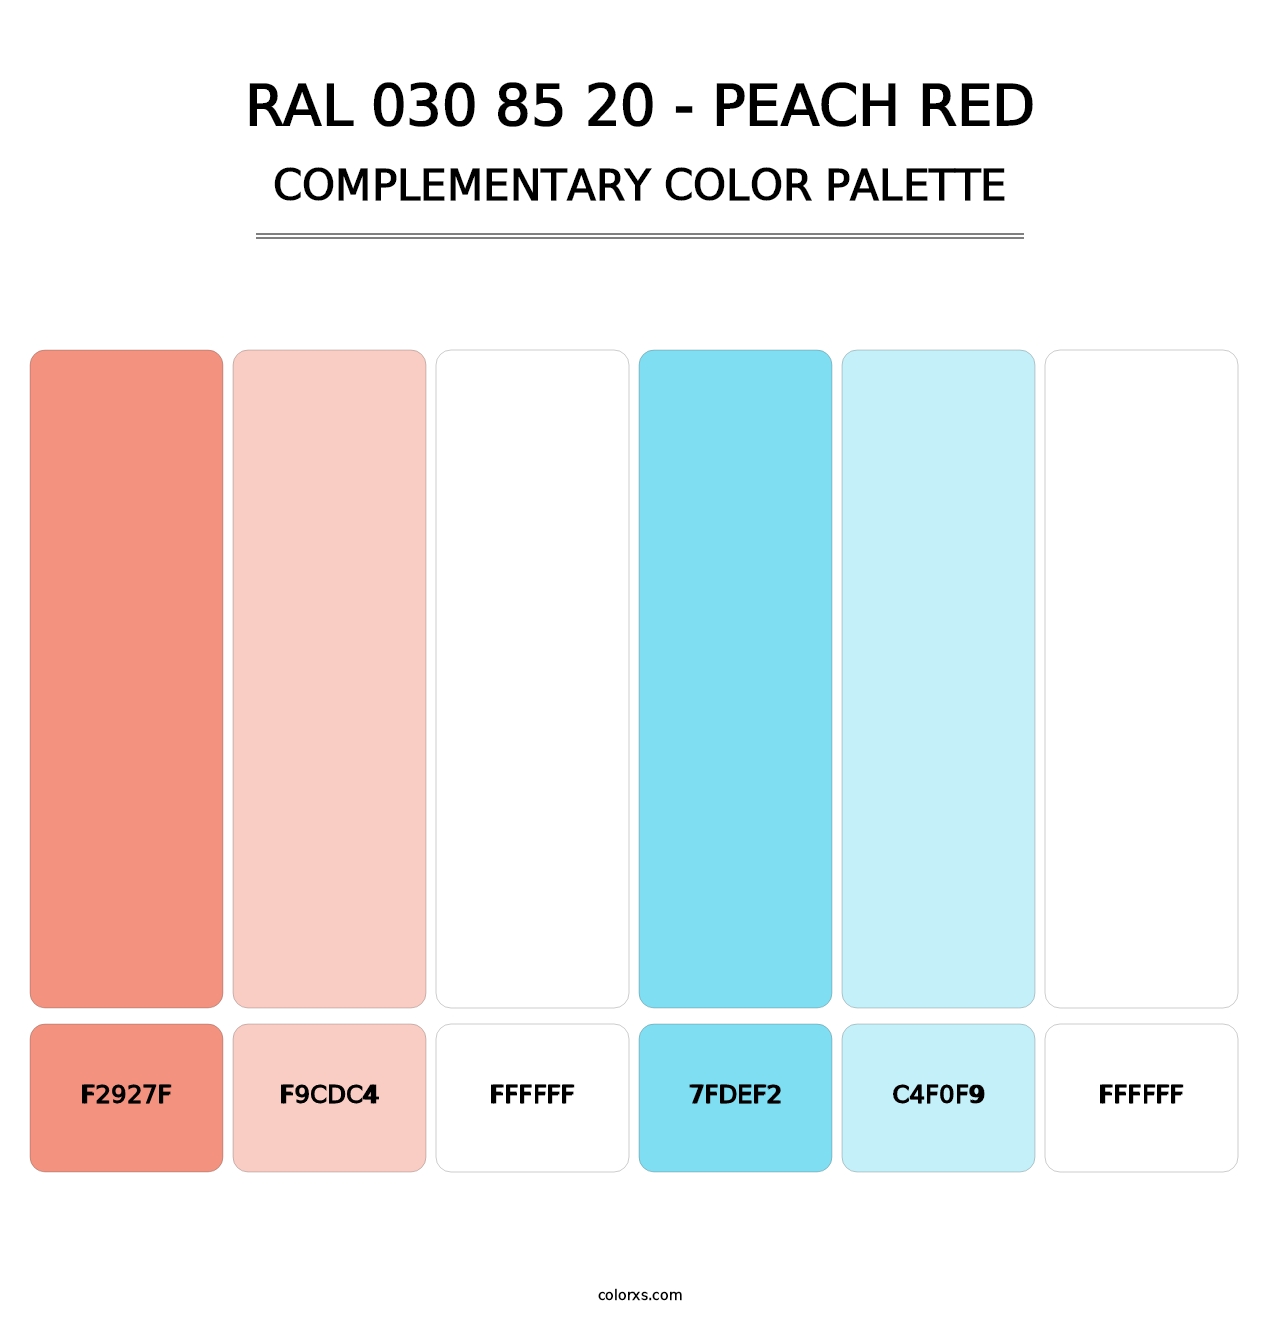 RAL 030 85 20 - Peach Red - Complementary Color Palette